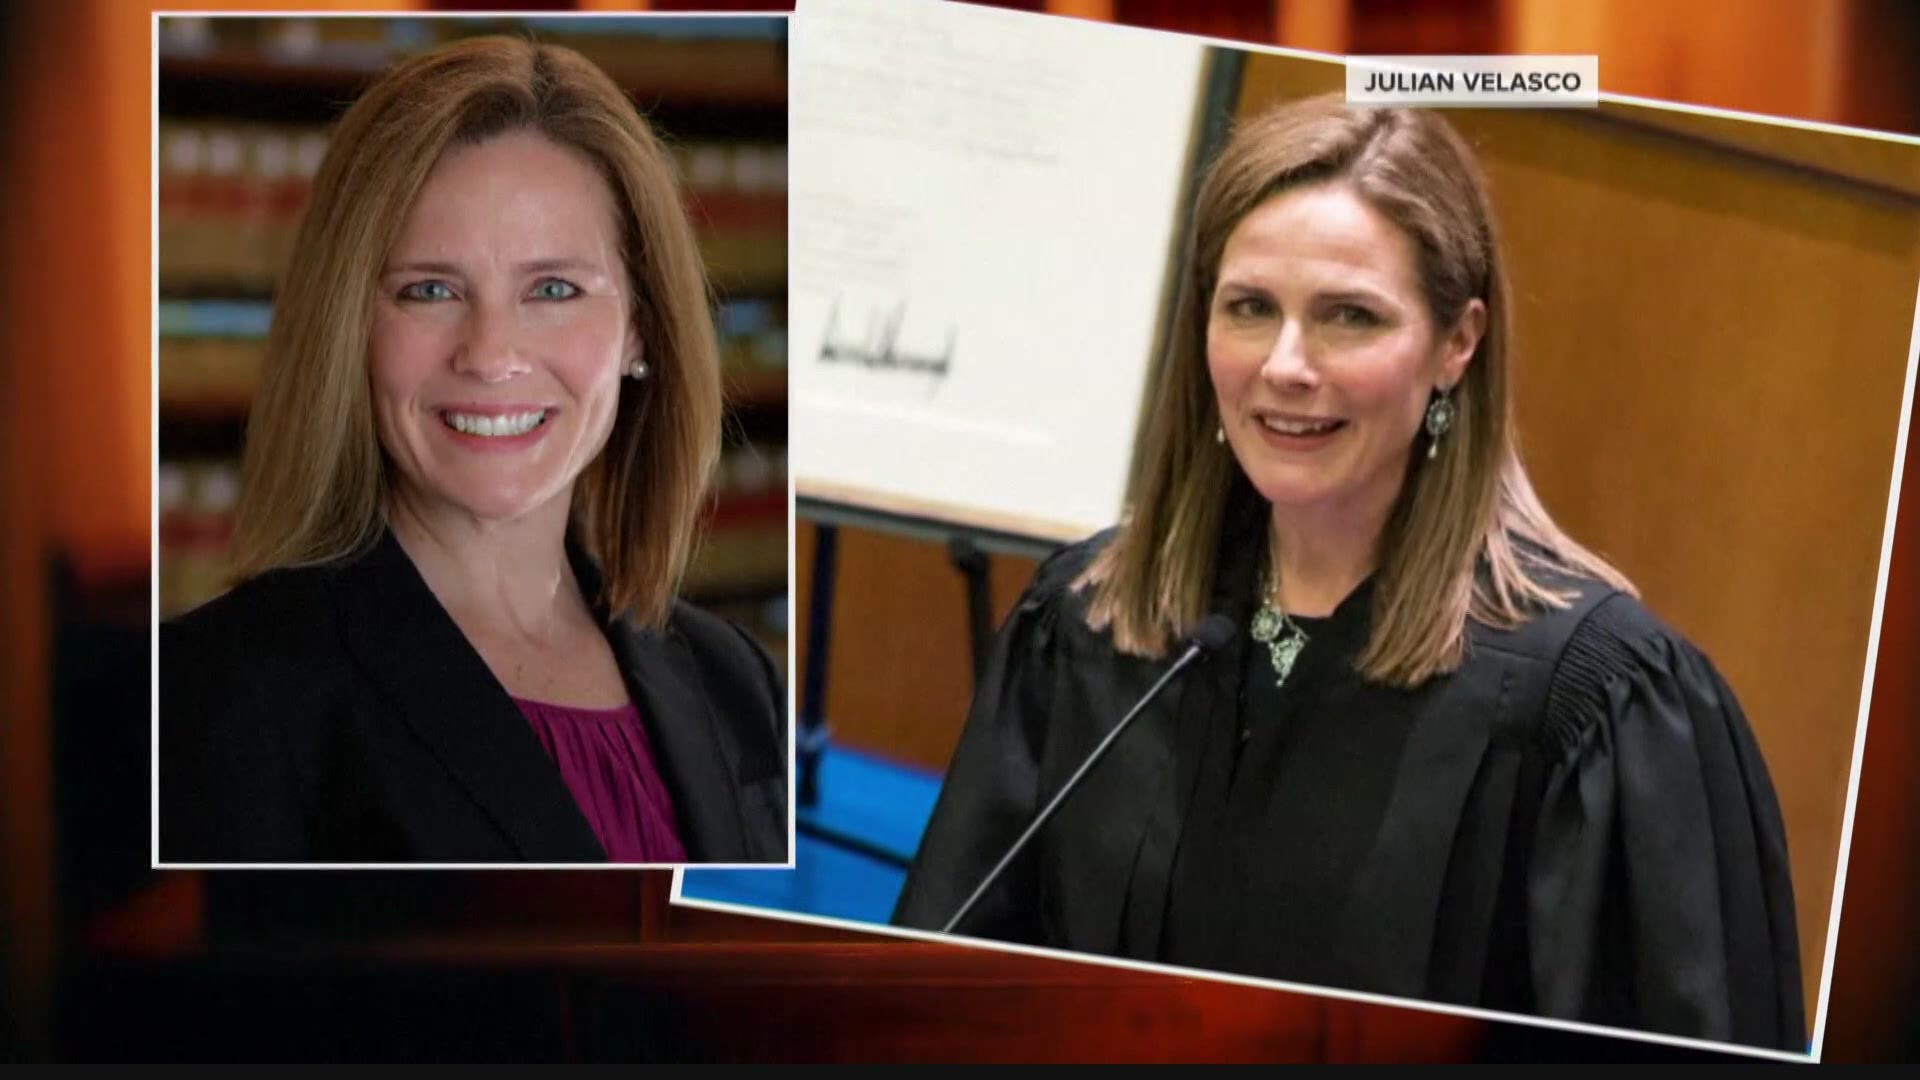 Judge Barrett, who lives in South Bend, is said to be a frontrunner for SCOTUS nomination.